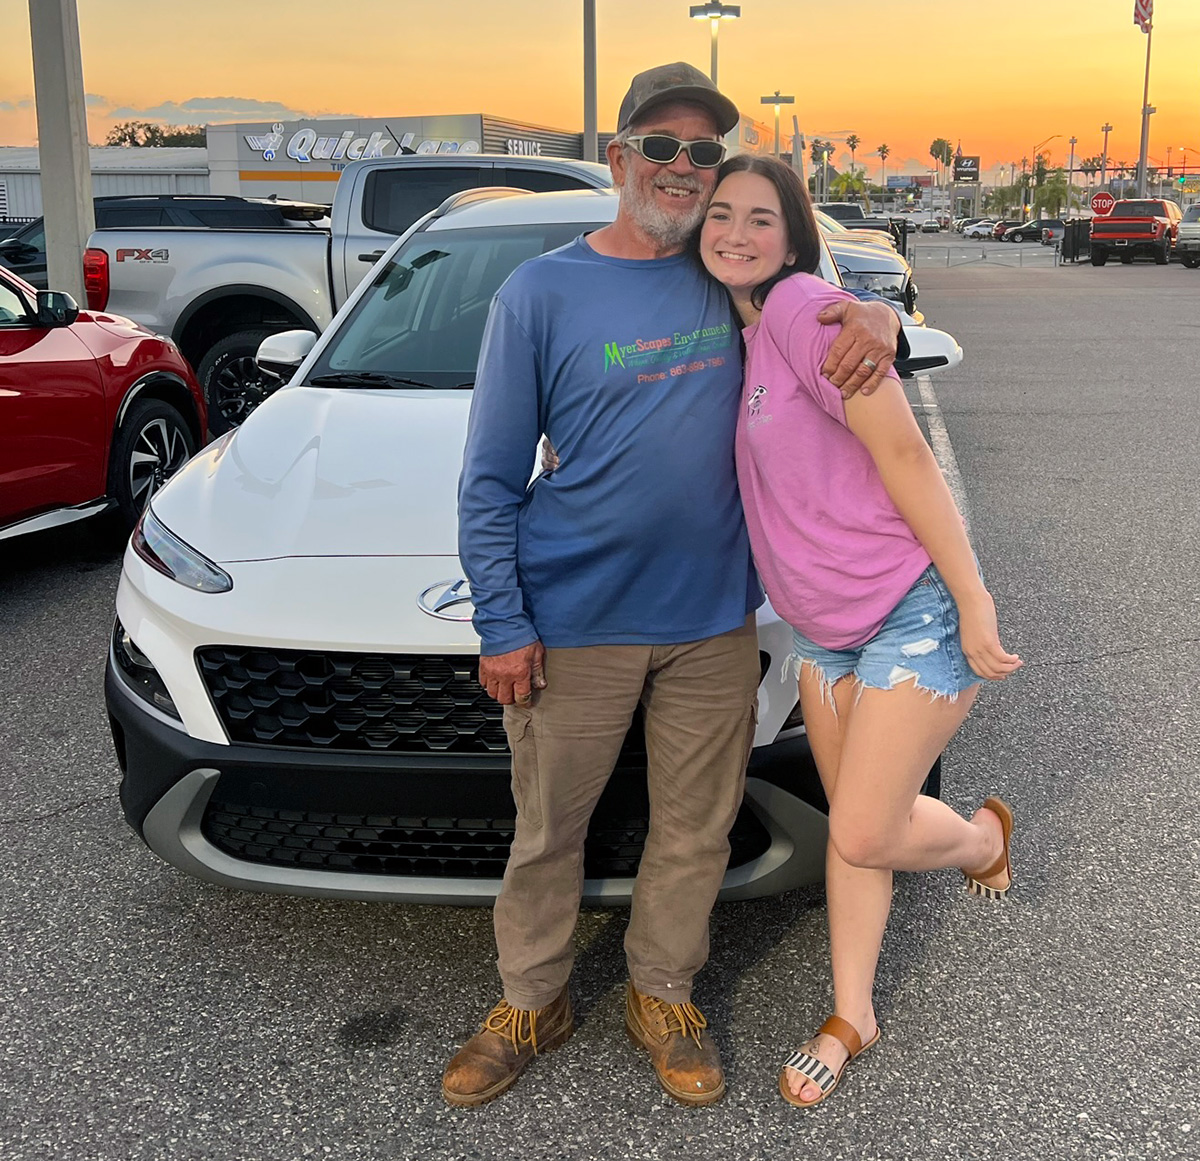 Getting a #GreatDeal on a #NewCar is what we do every day & when Summer Dodson was searching for hers, she brought some backup just to make sure... salesperson #ElijahCala made buying #Fast, #Fun & #Easy! #Congratulations Summer & #ThankYou for choosing us - we're here for you!